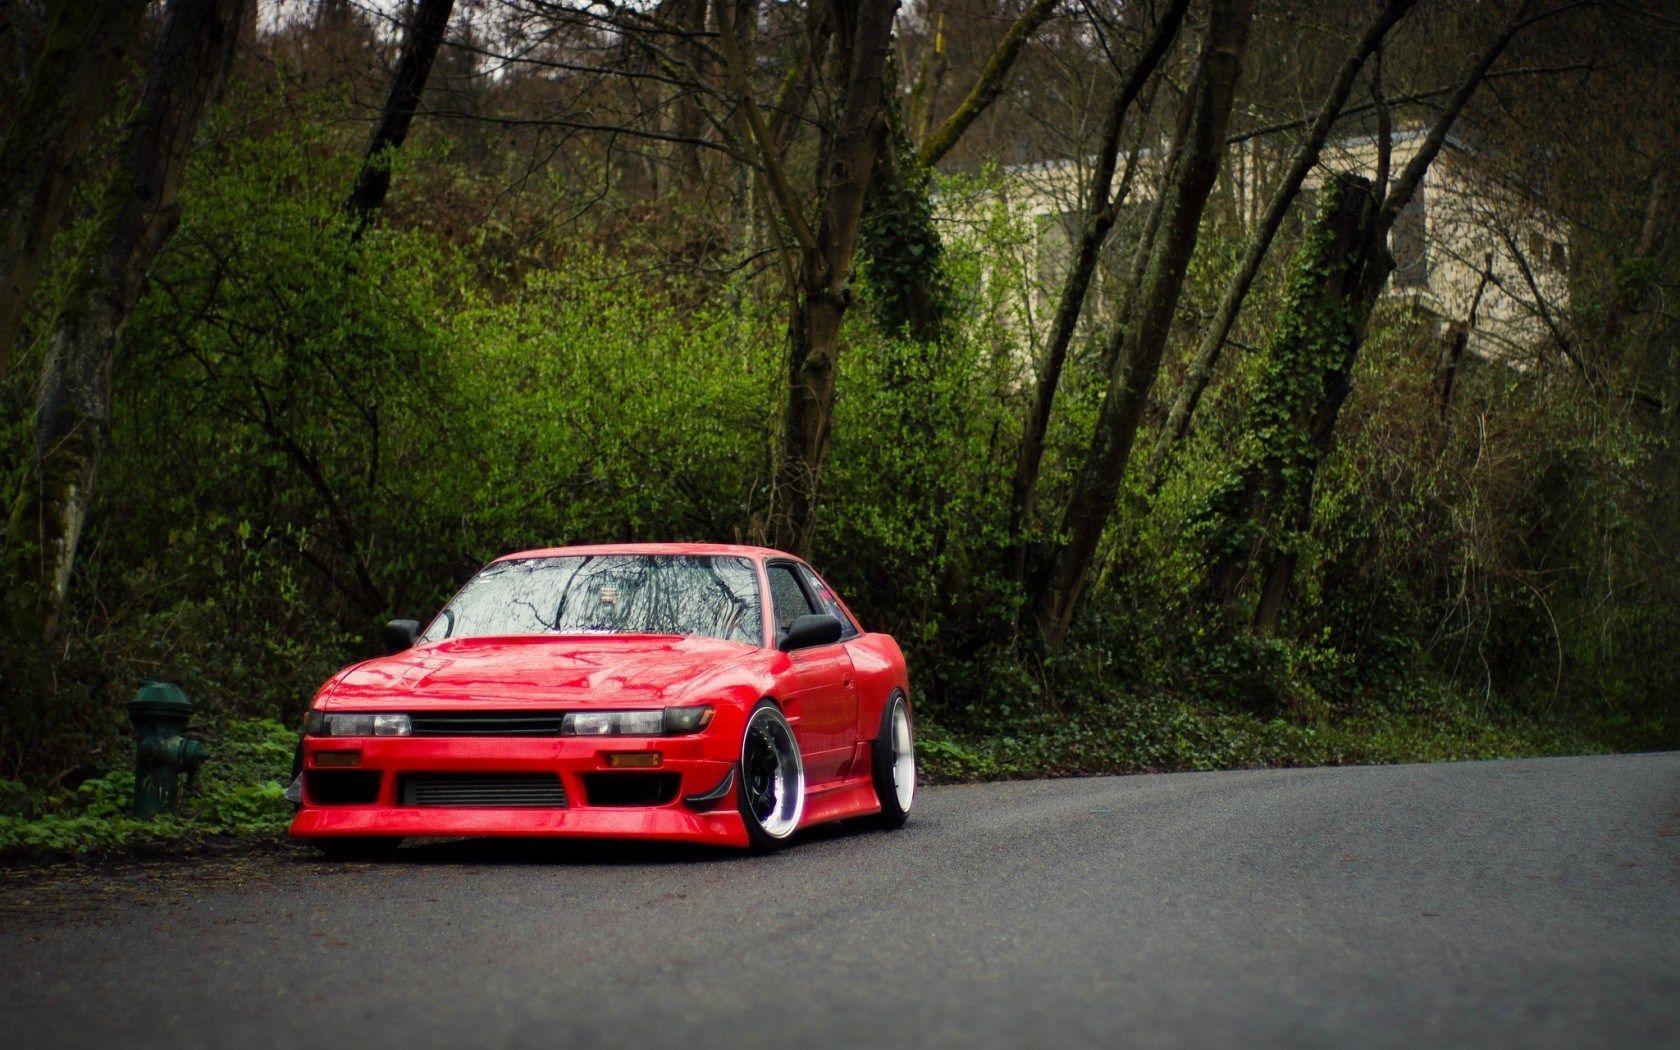 Nissan Silvia S13 Front Red Road HD Wallpaper. Nissans R Us